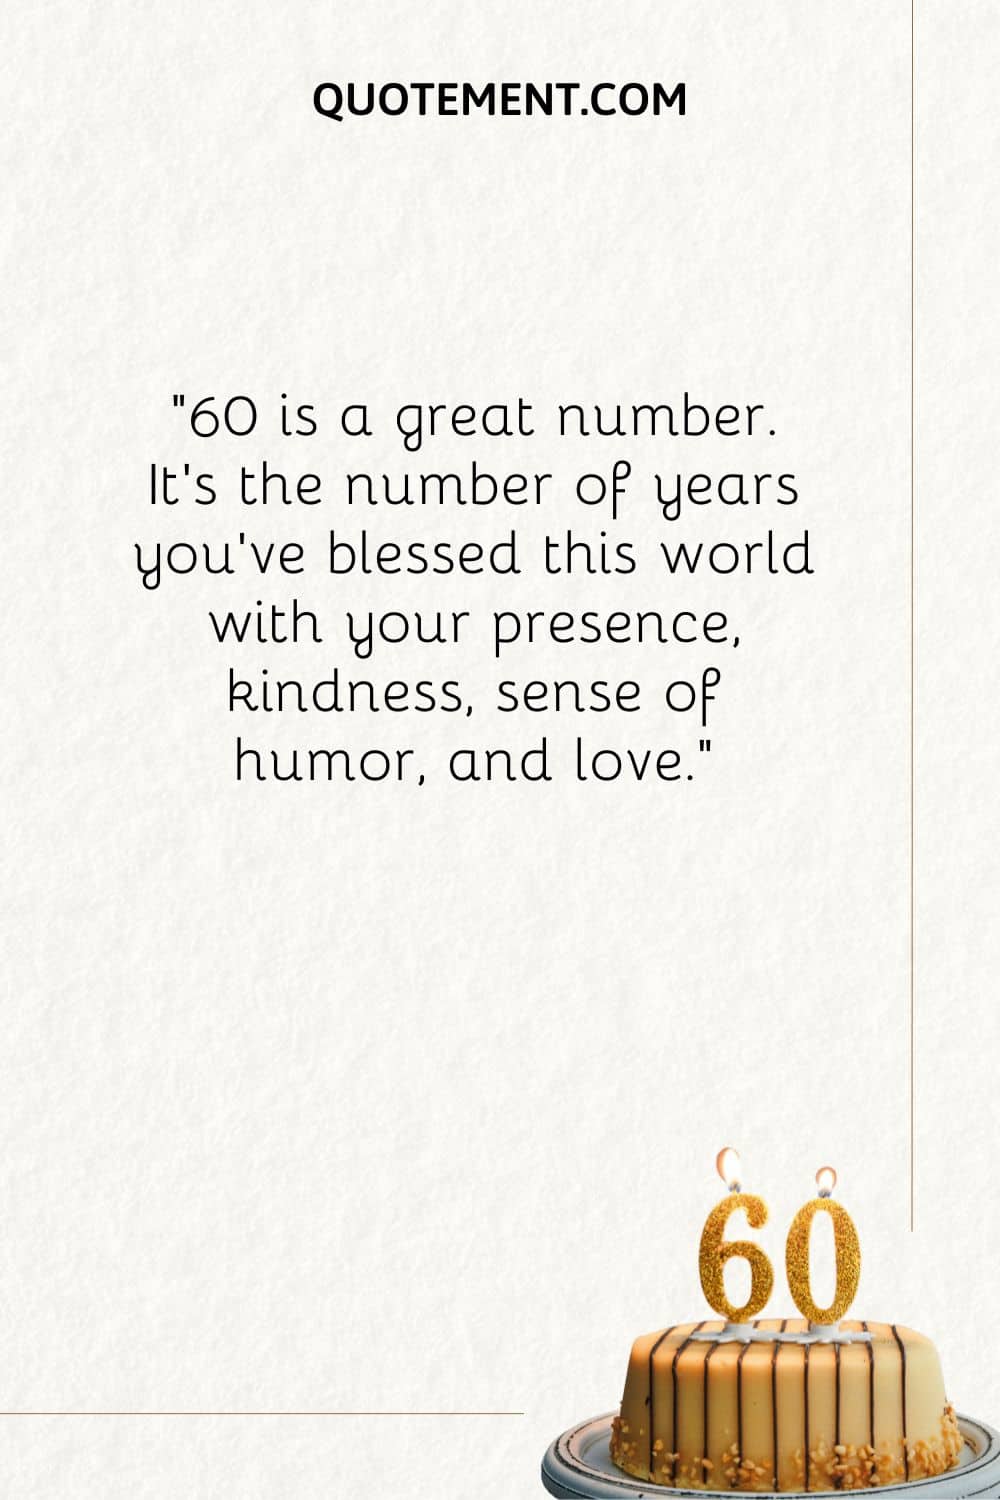 60 is a great number. It’s the number of years you've blessed this world with your presence, kindness, sense of humor, and love.